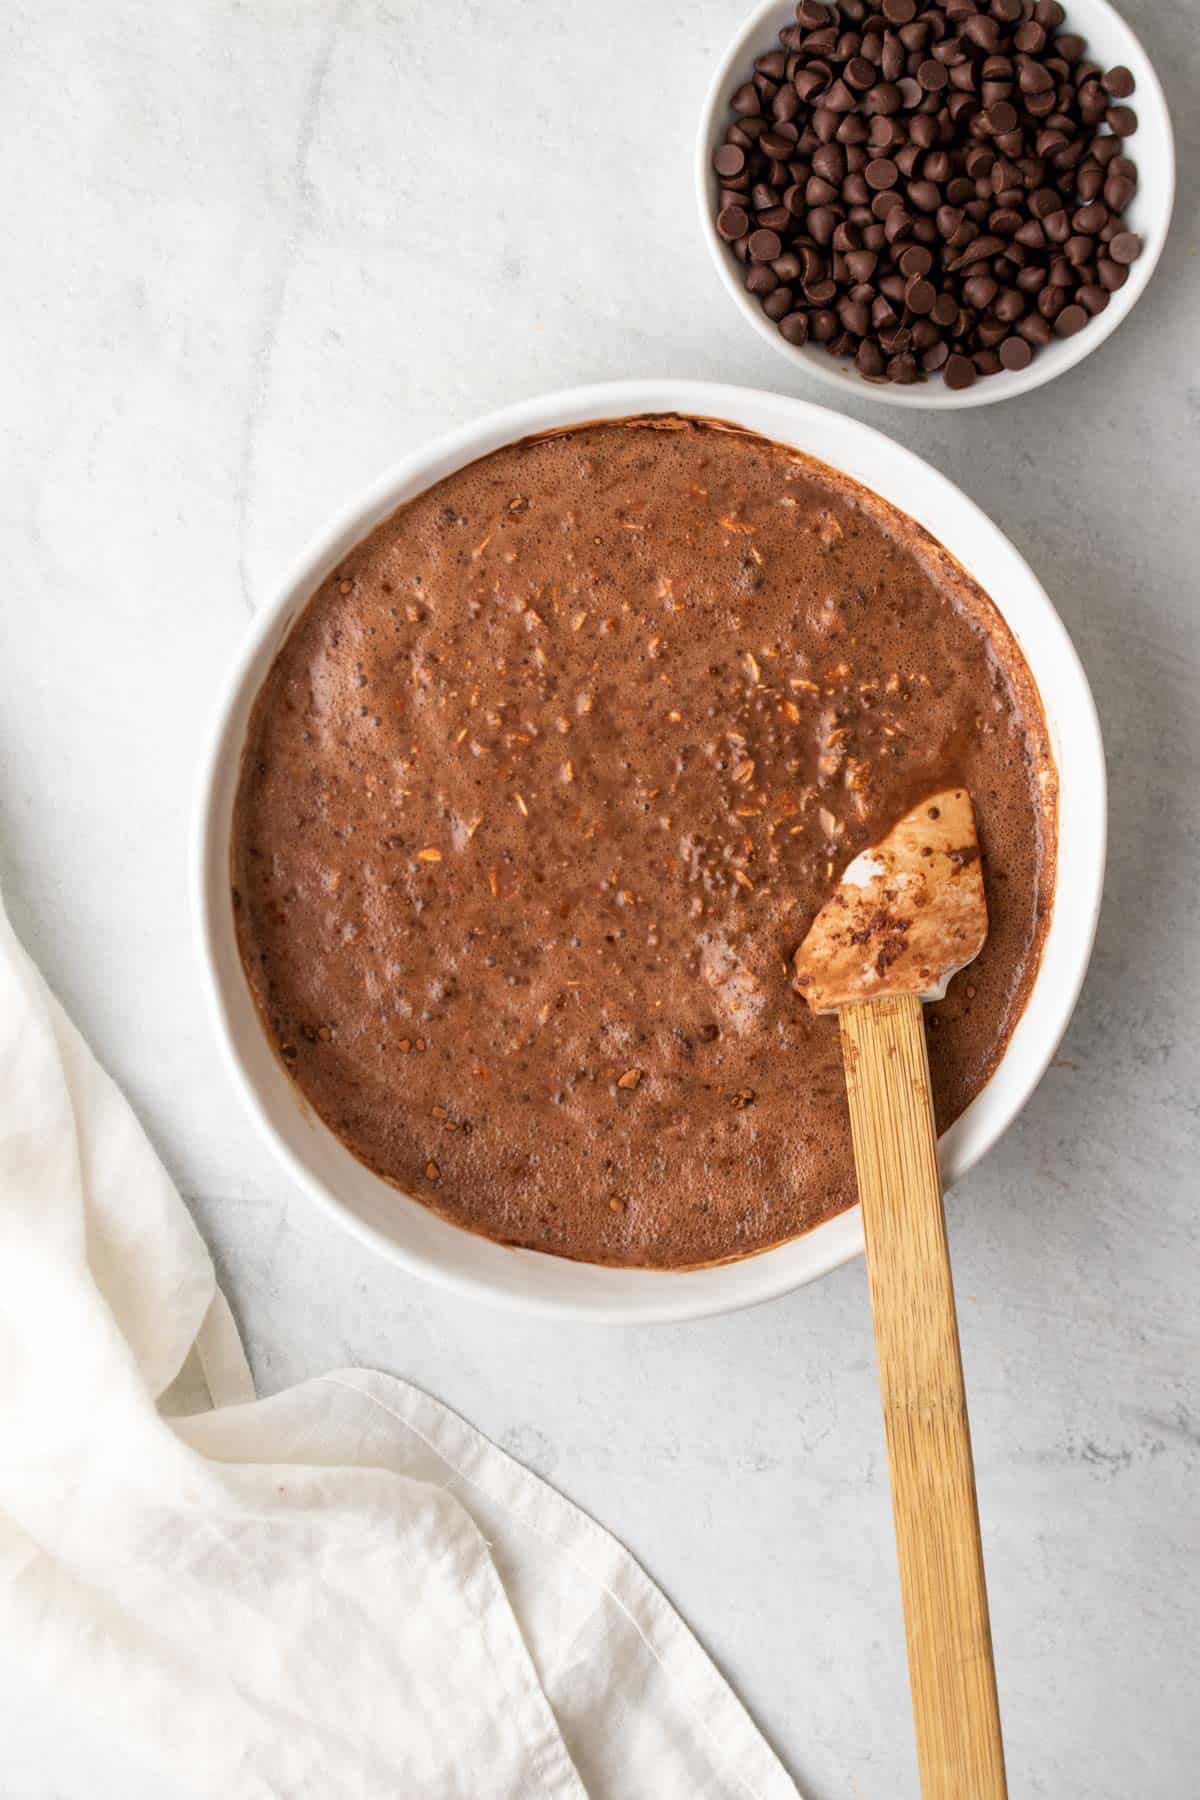 mixed overnight oats with chocolate and peanut butter 